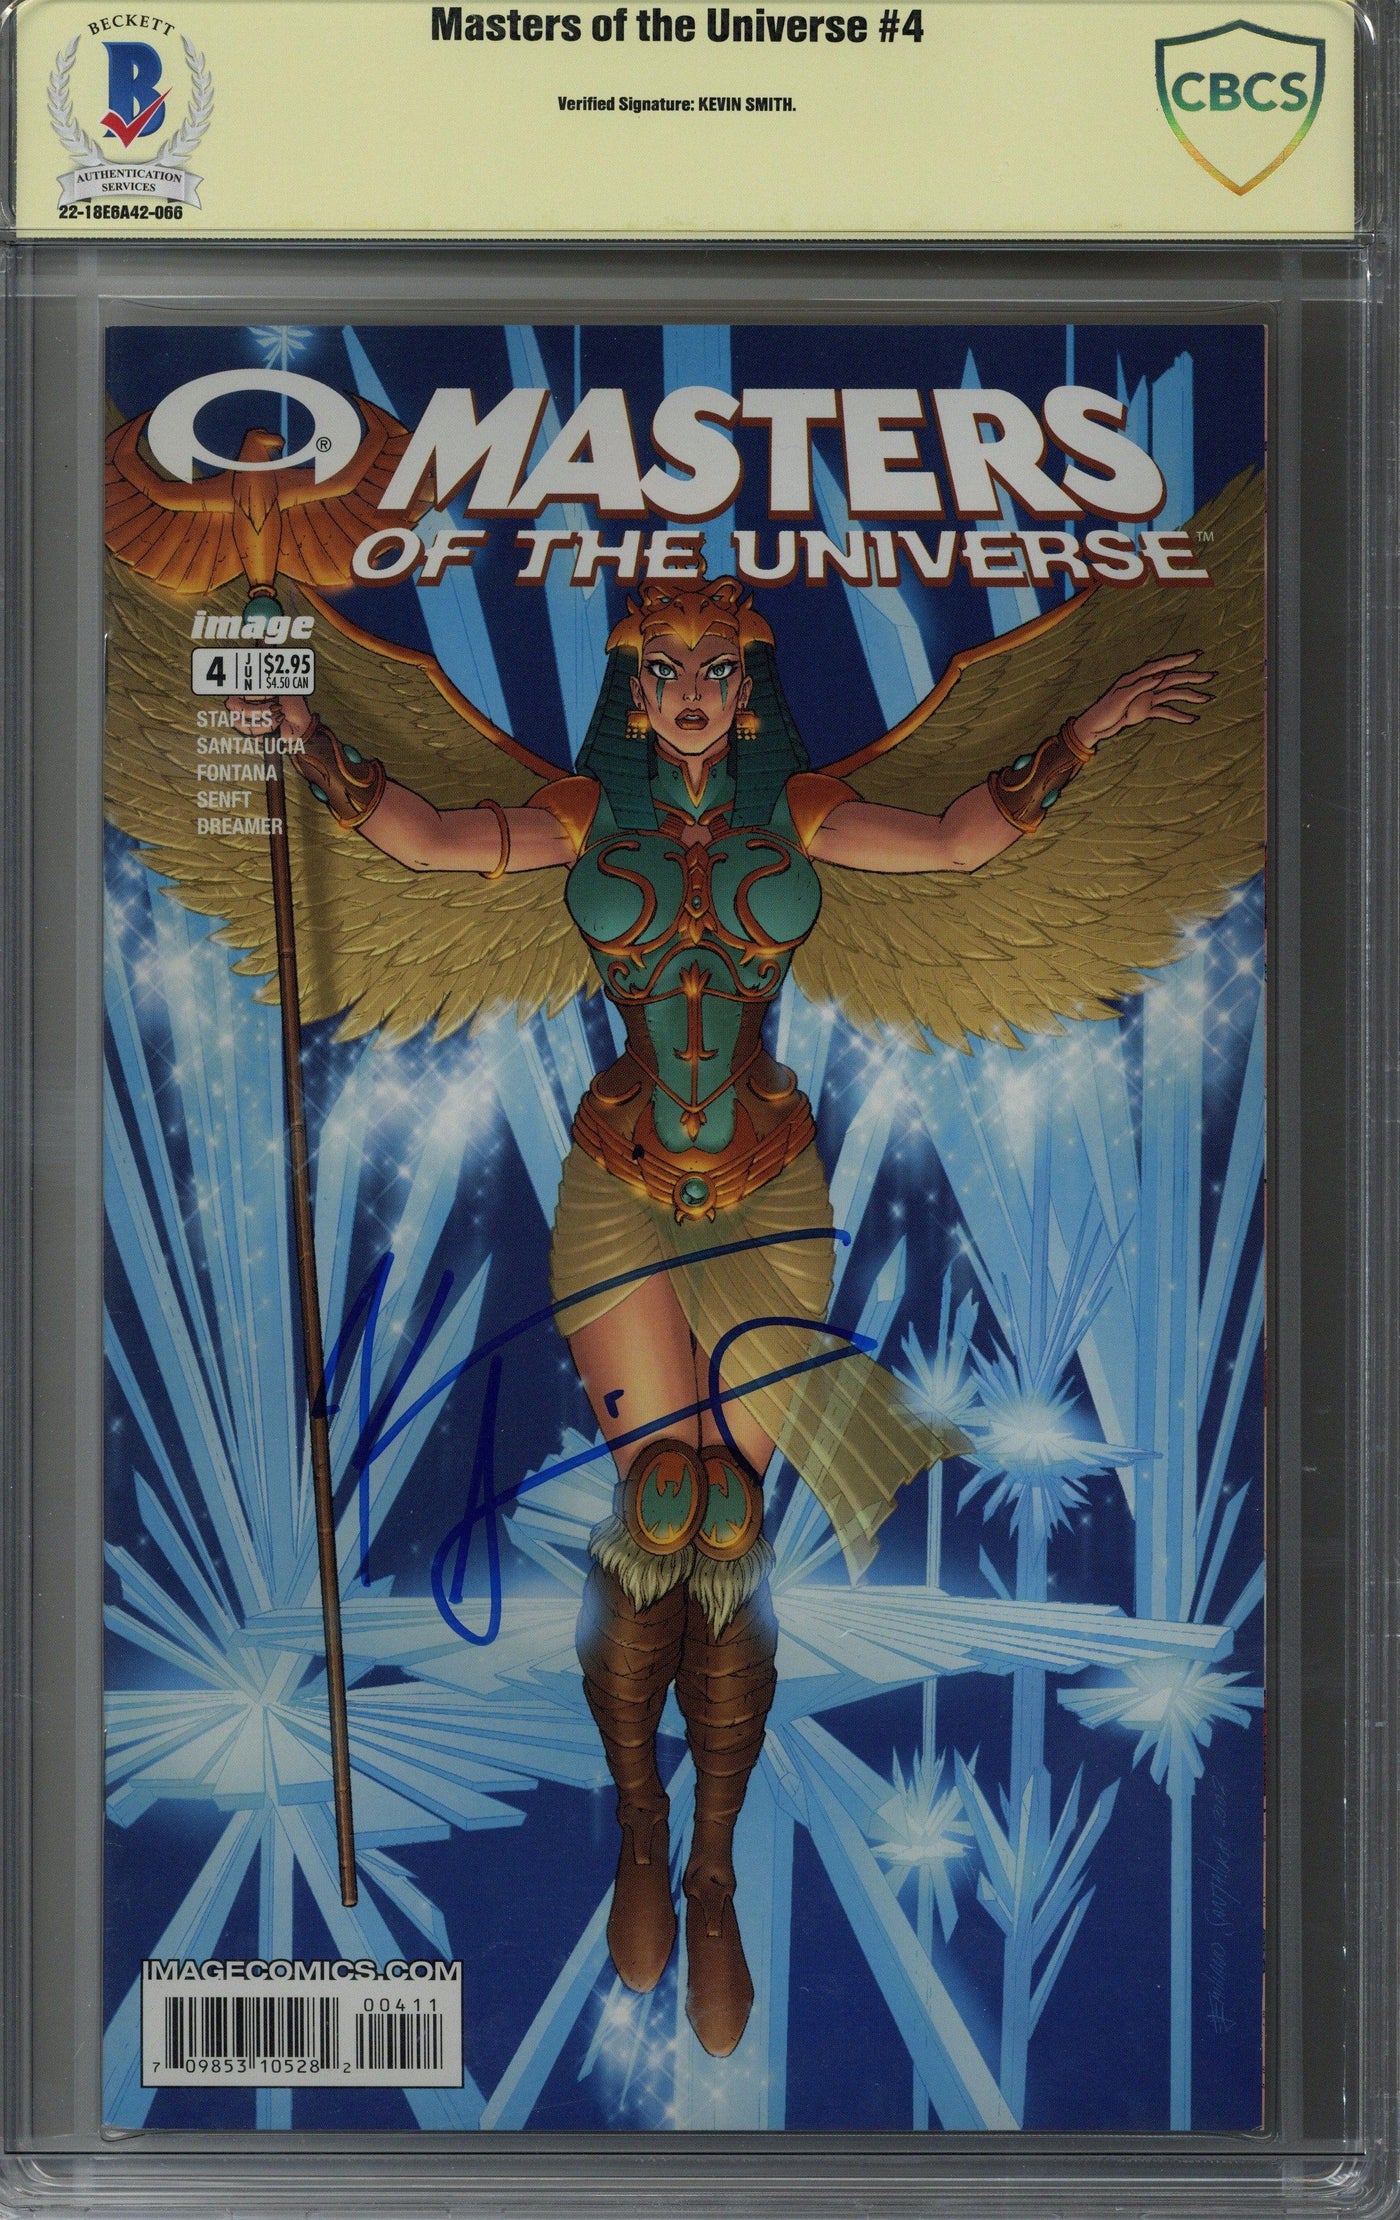 KEVIN SMITH SIGNED MASTERS OF THE UNIVERSE #4 COMIC BOOK CBCS